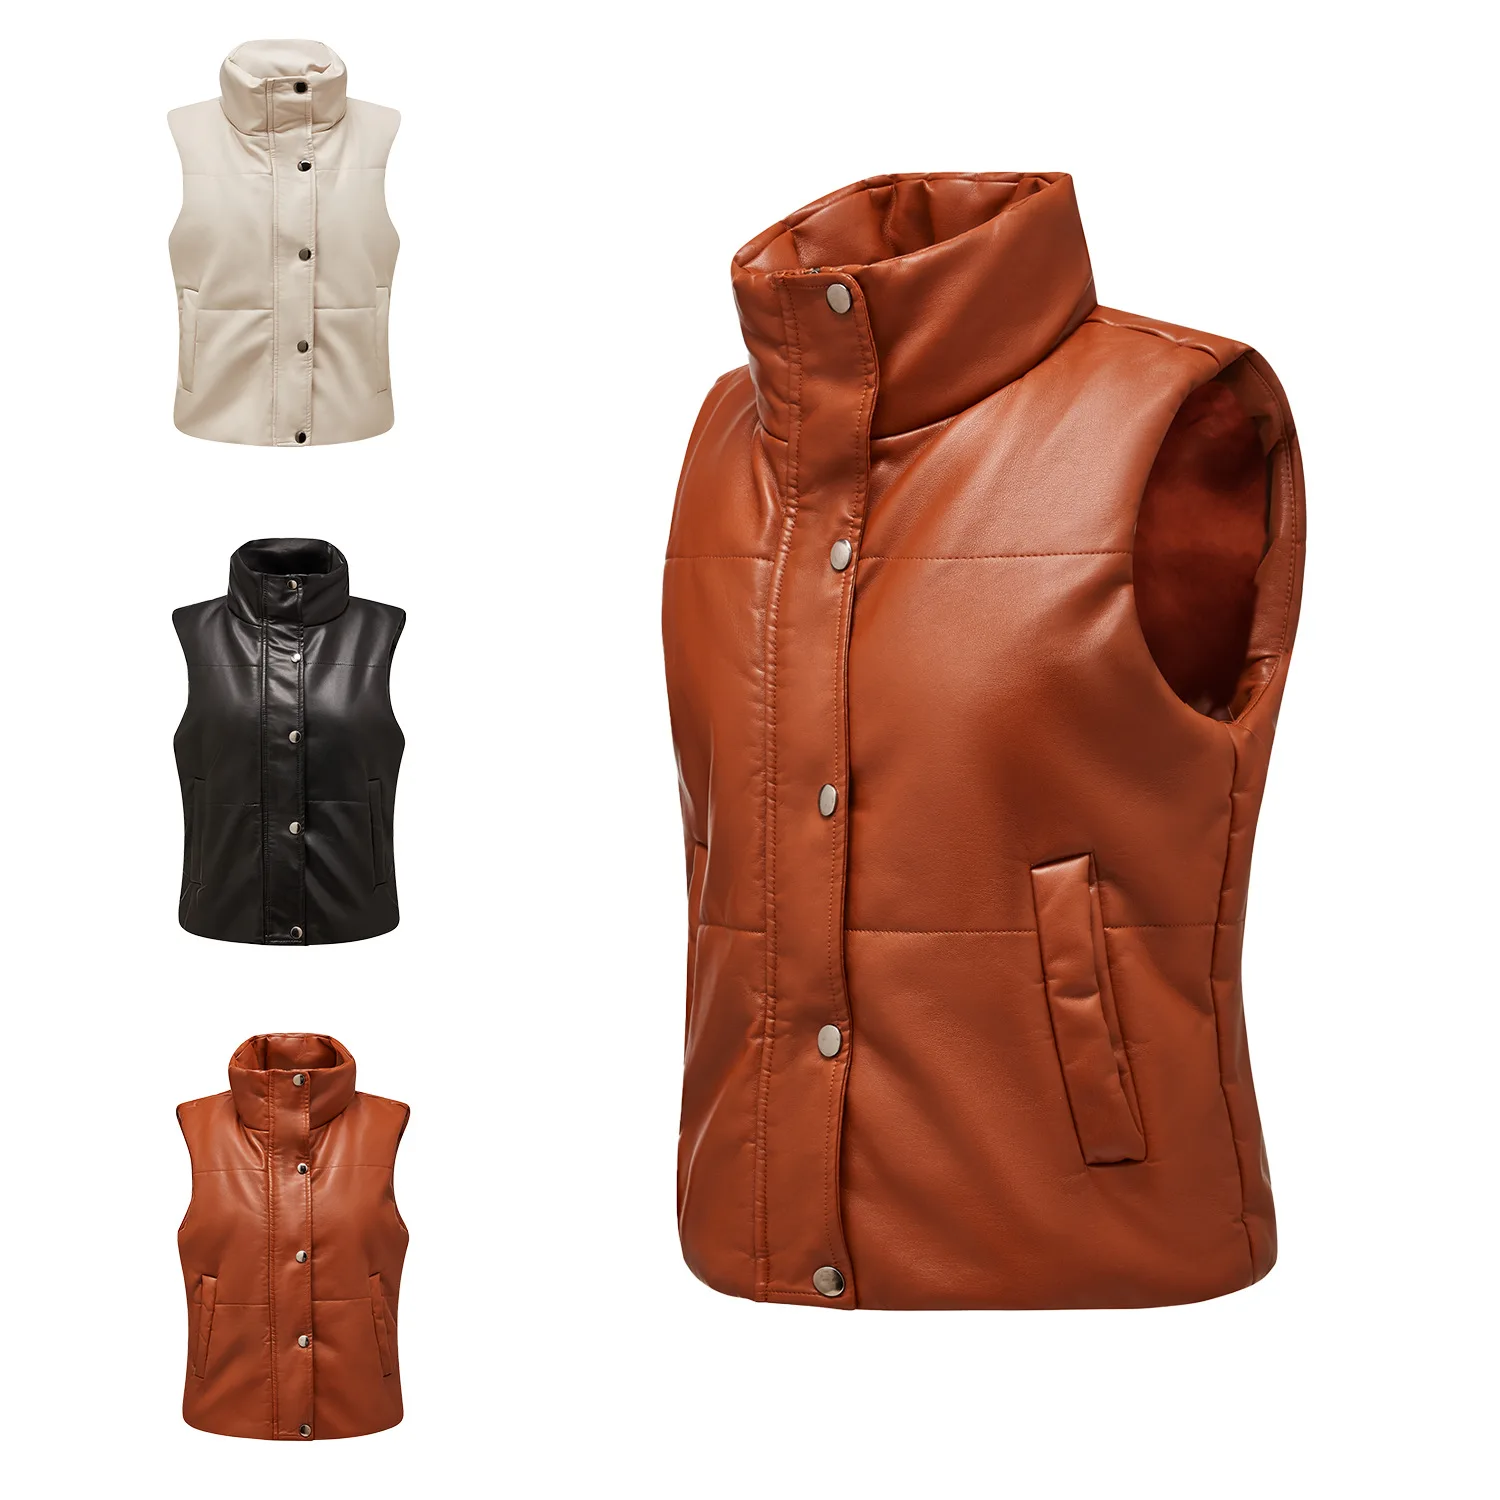 2022 Autumn Winter Women Leather Vest Sleeveless Quilted Zipper Cotton Clothing Fashion Stand Collar Jacket